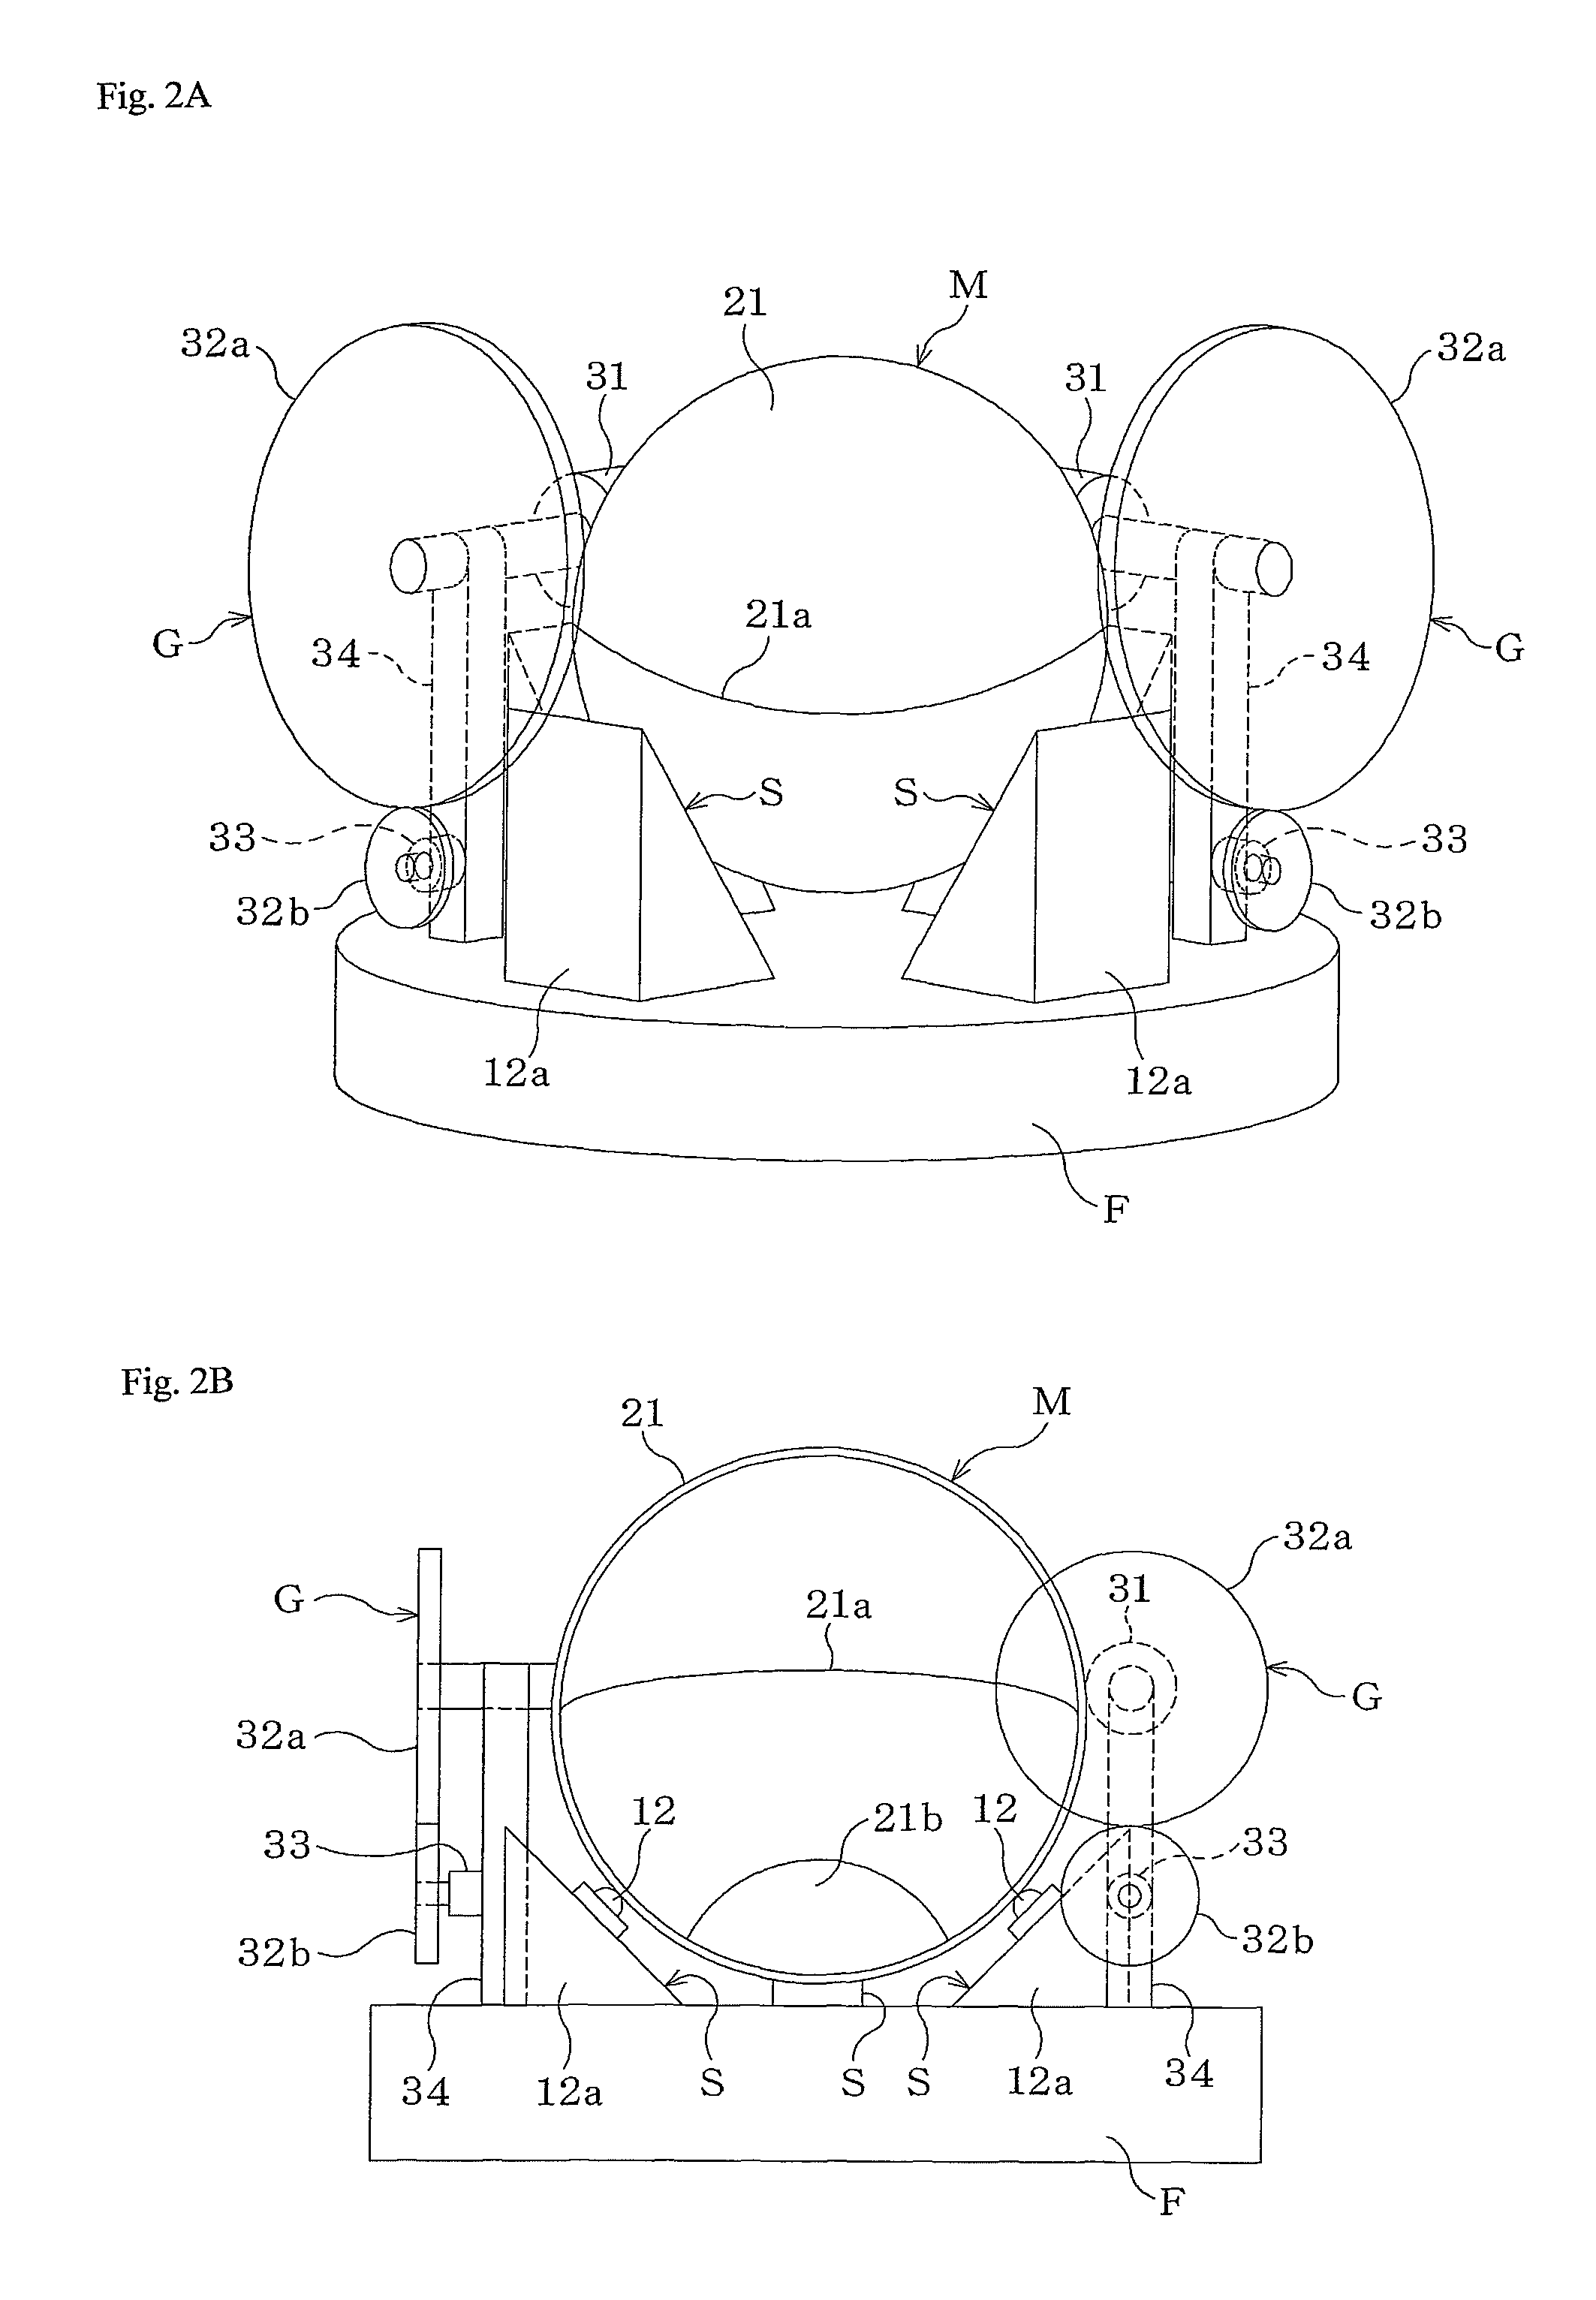 Apparatus for generating electric power